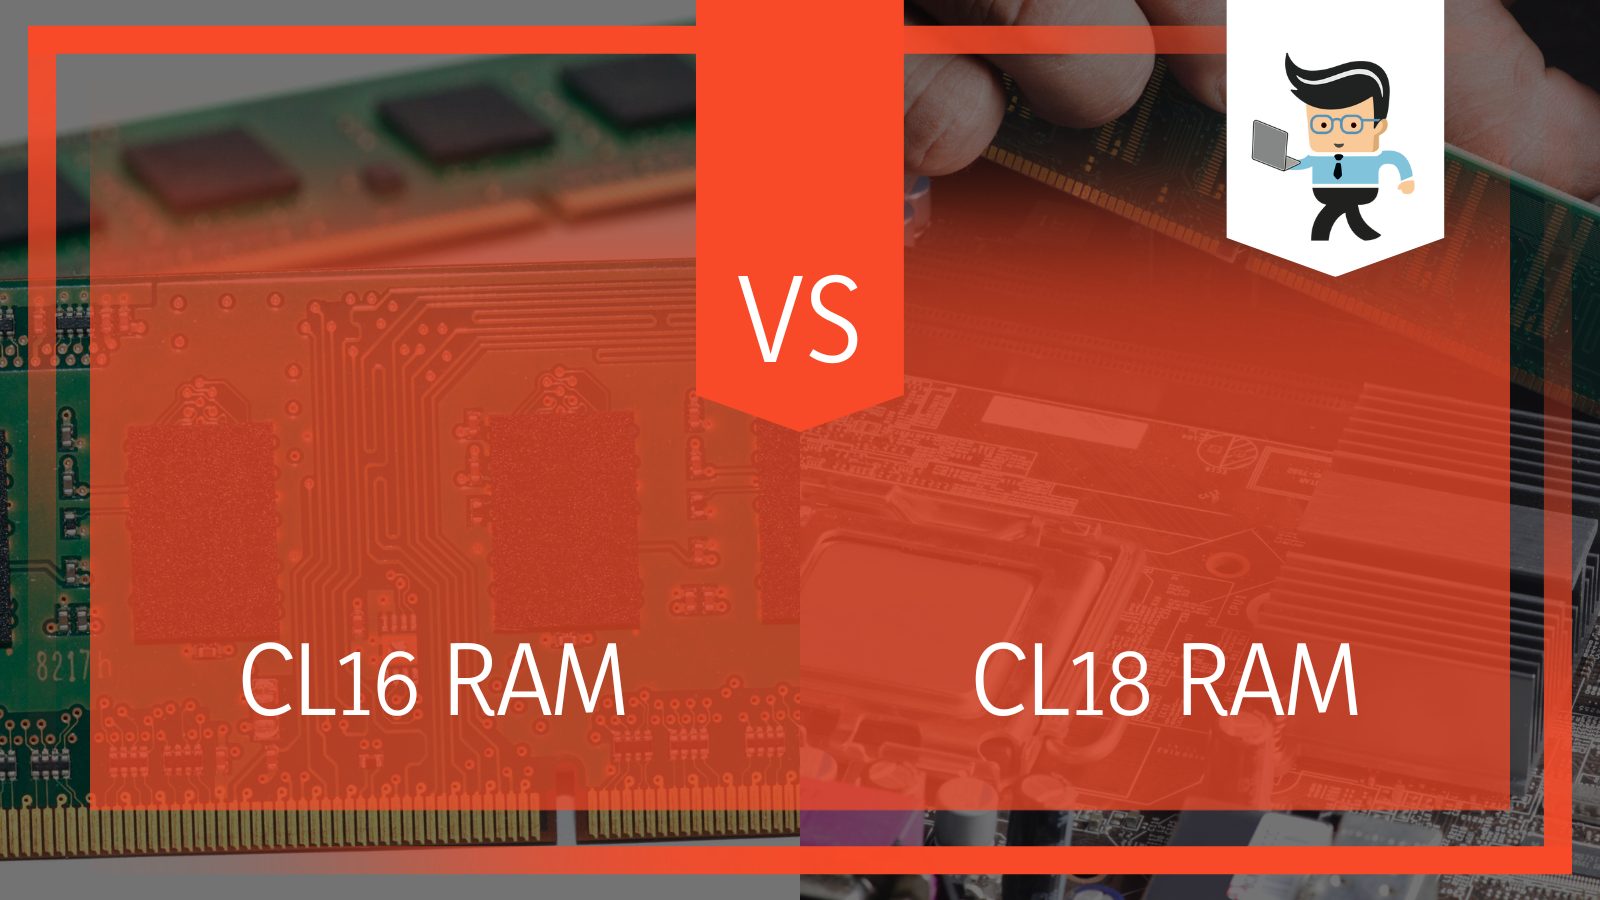 CL16 vs CL18 RAM Gaming Differences